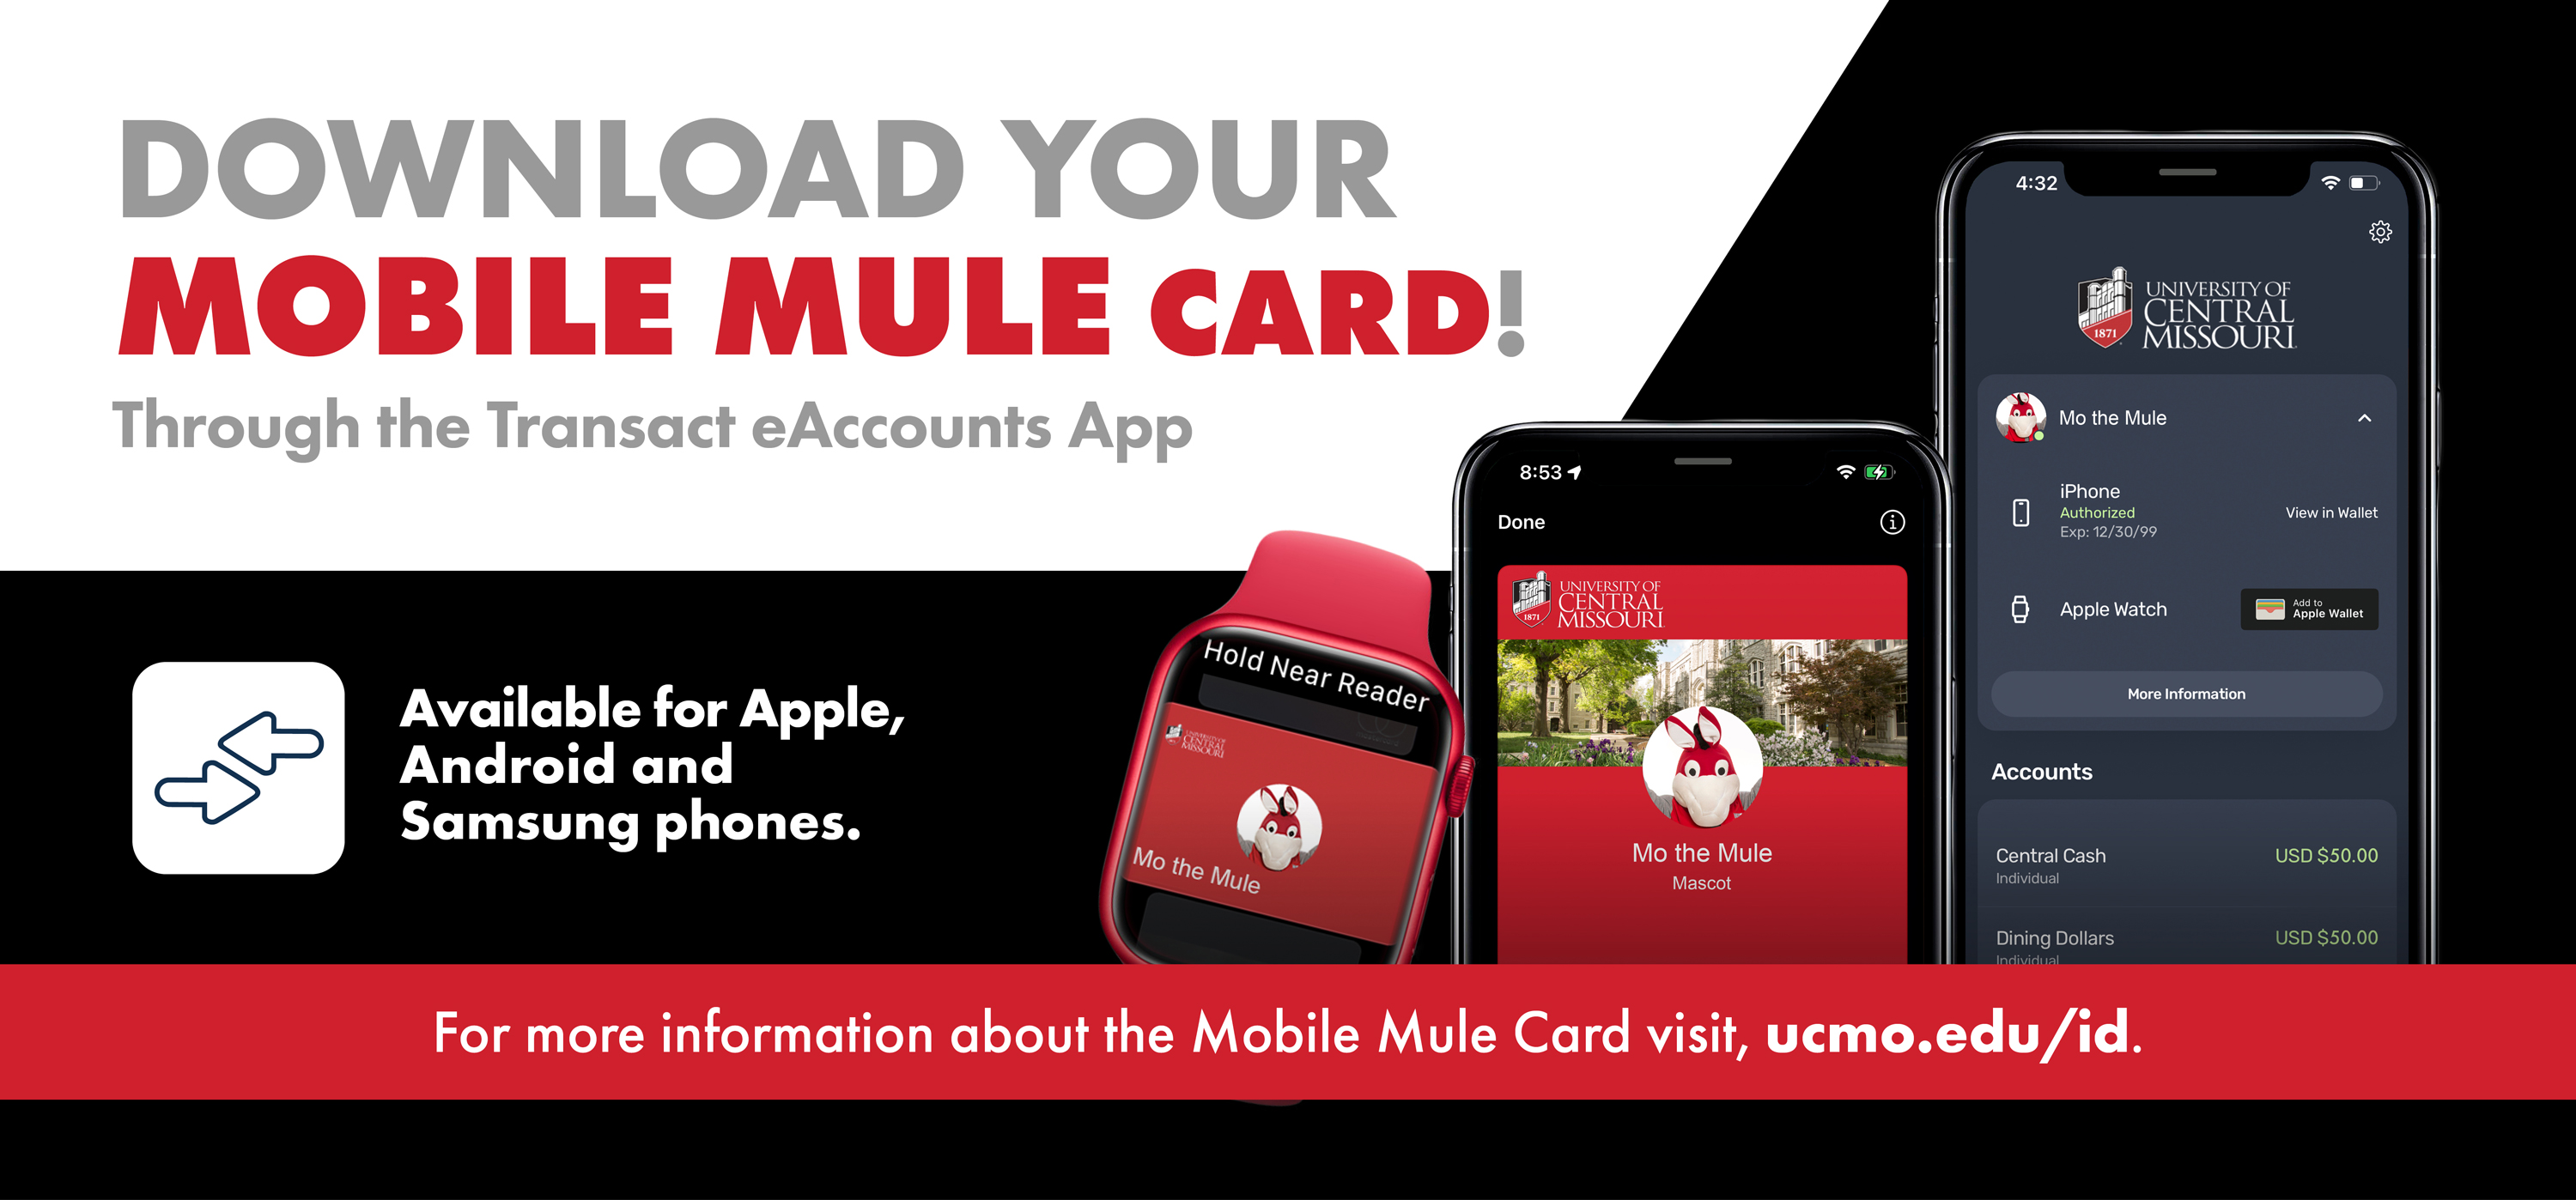 Mobile Mule Card images with a cell phone, apple watch, app icon